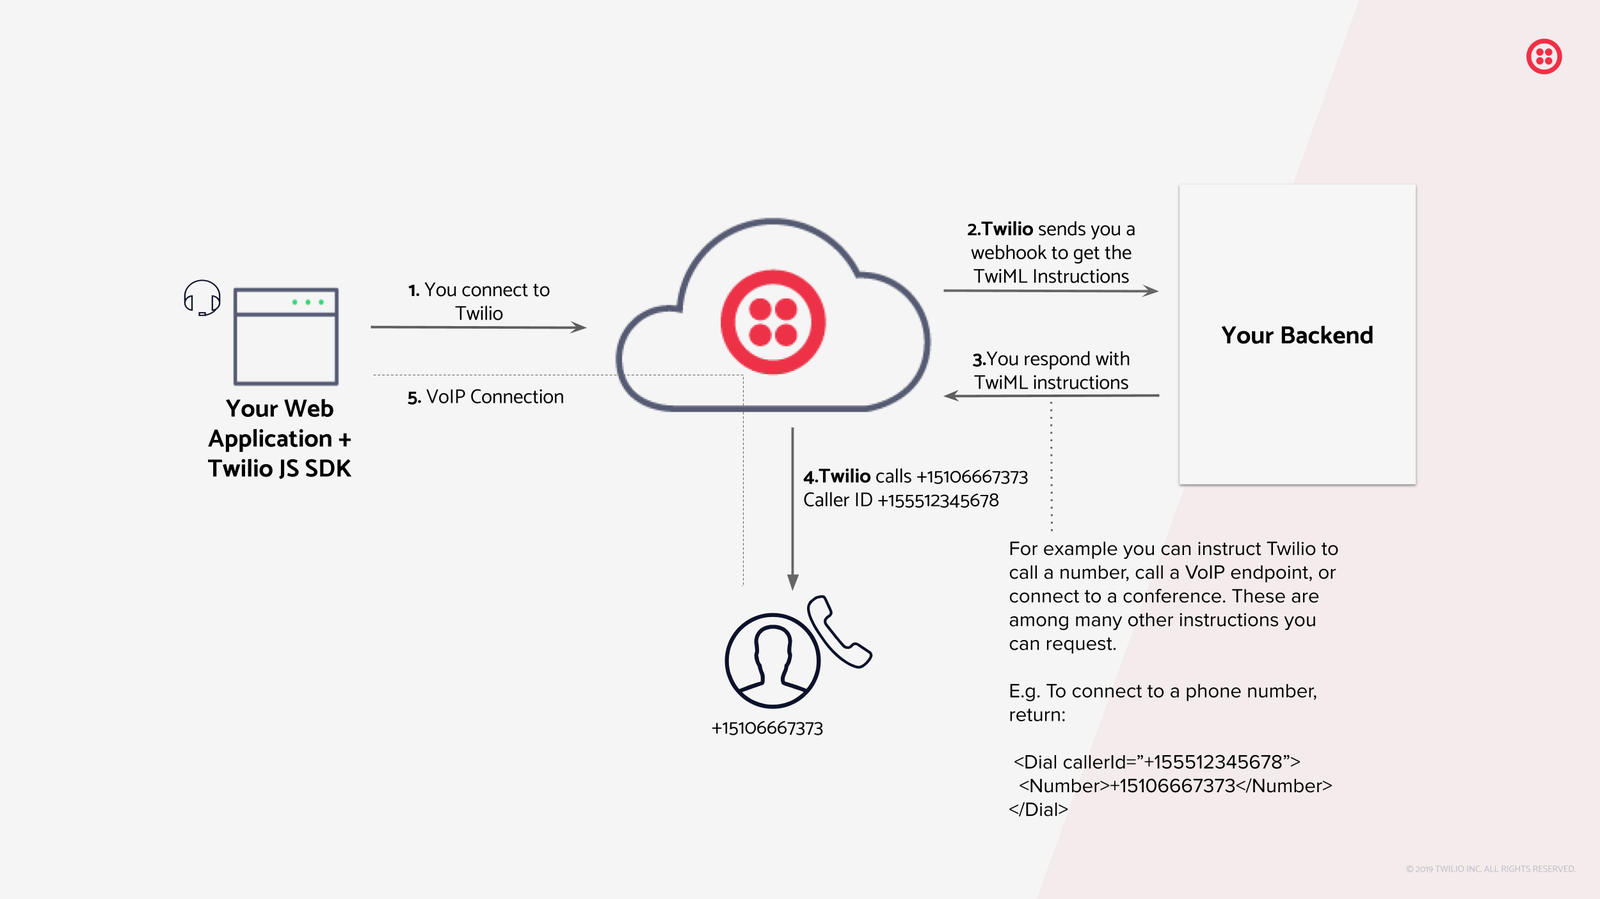 Your application connects to Twilio, Twilio sends a webhook to your back end to get TwiML instructions.